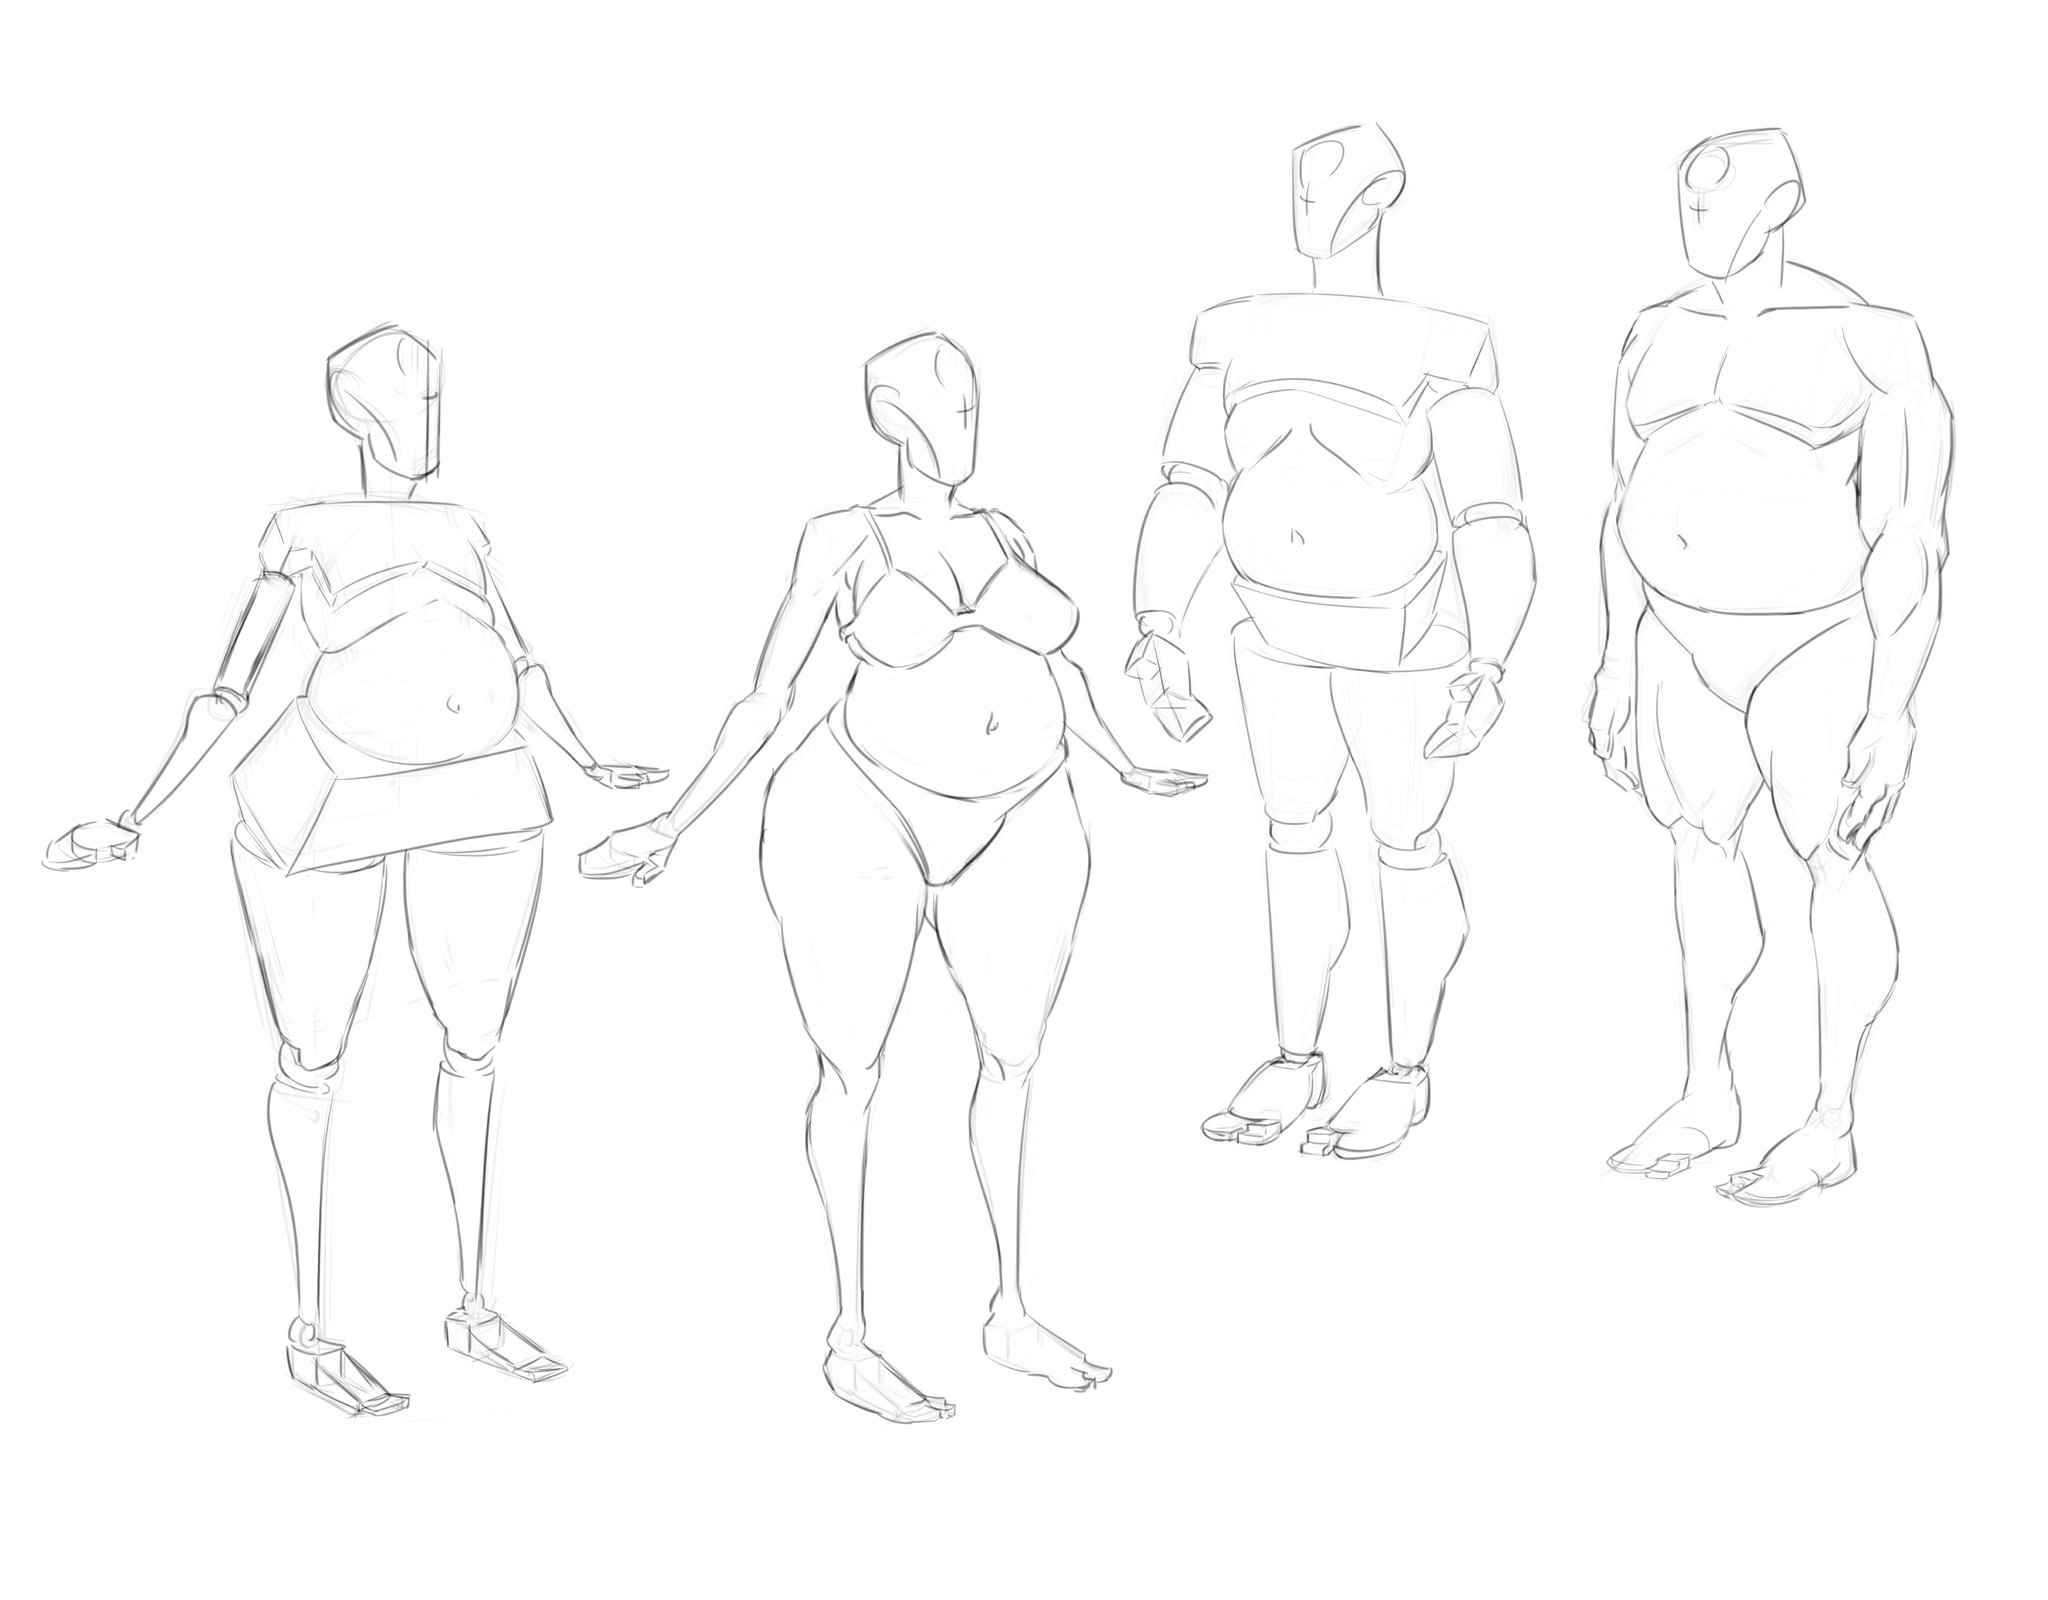 How to identify your Body Shape